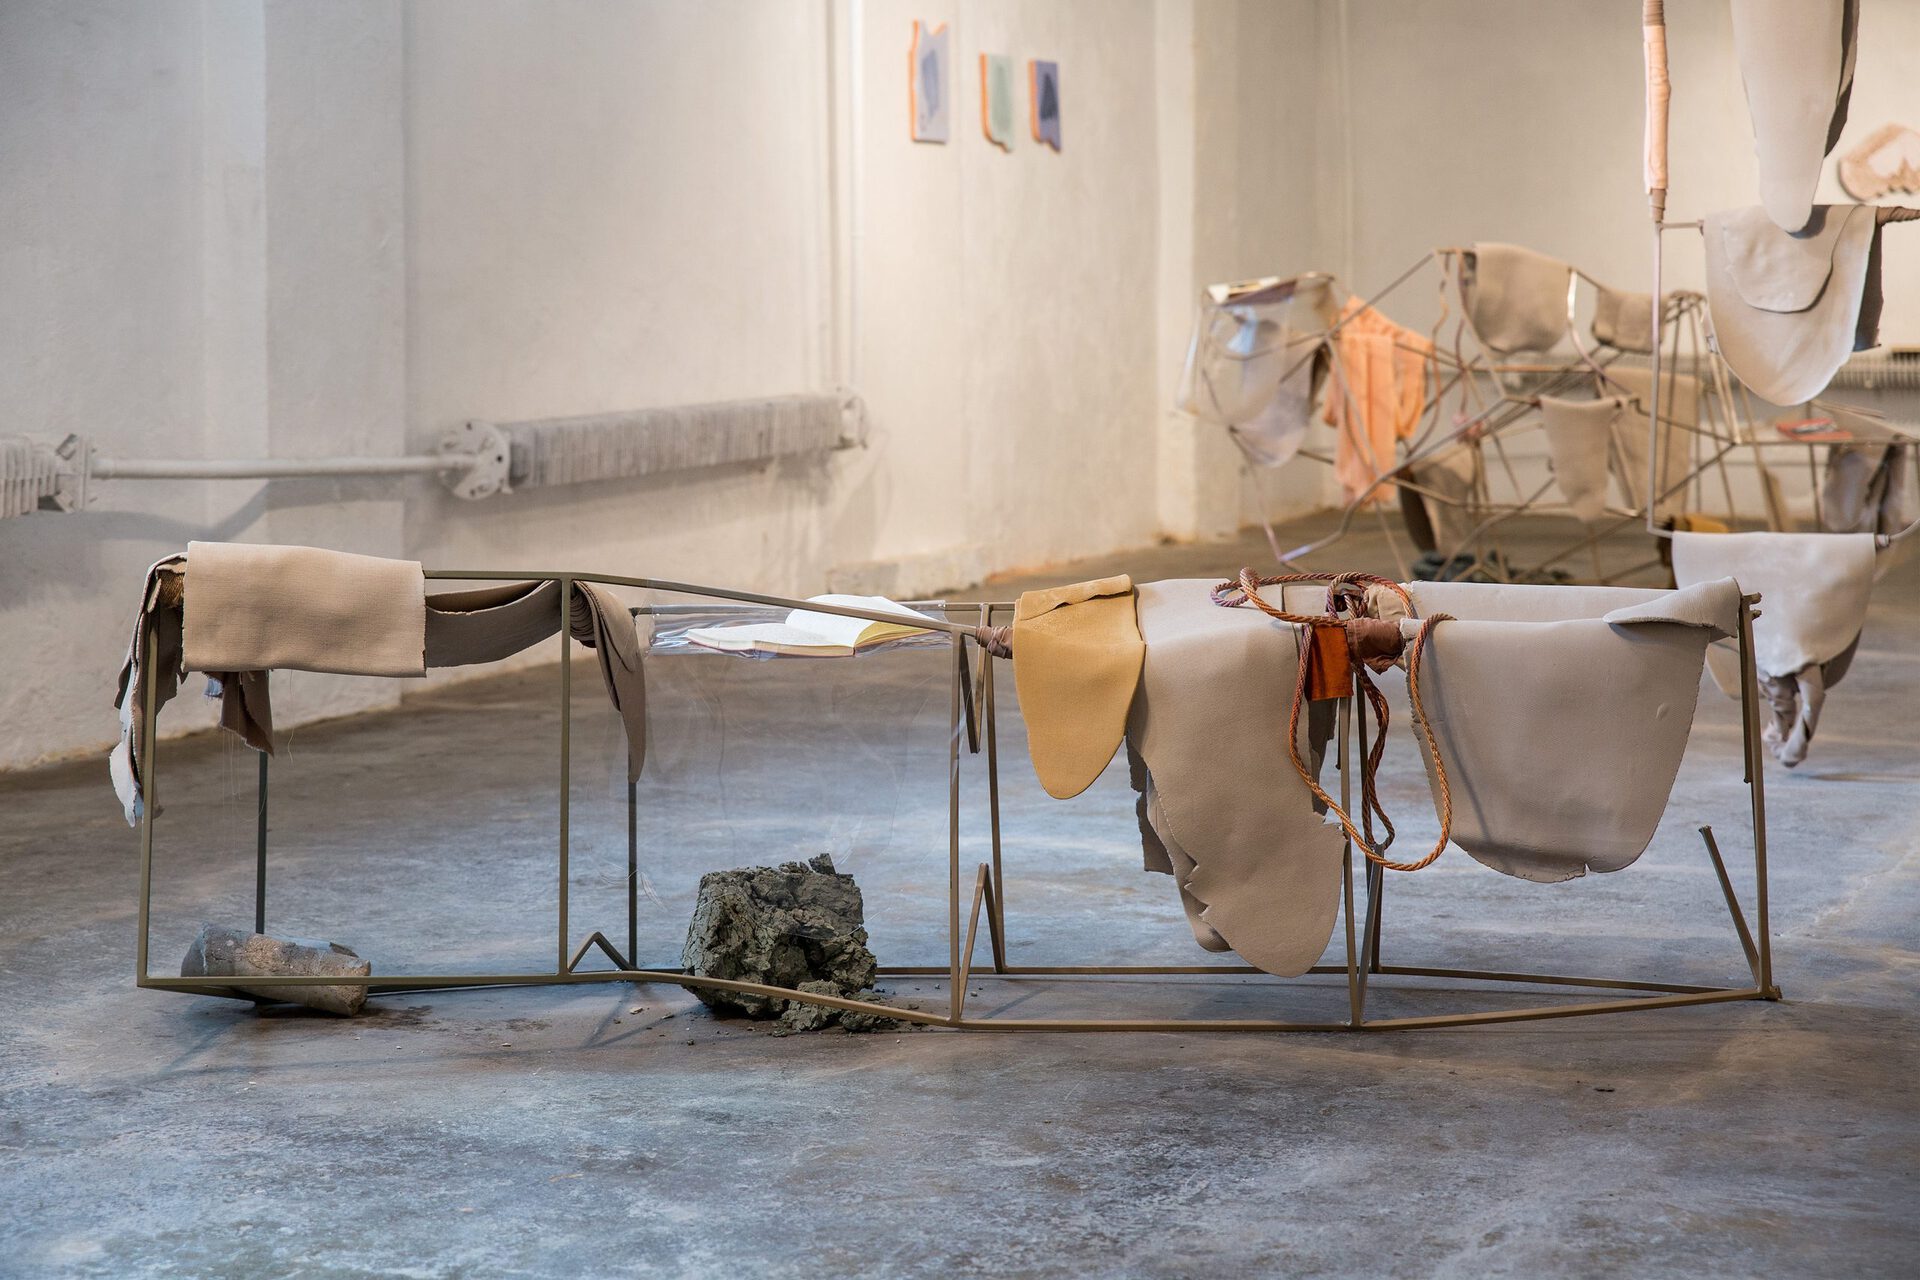 Laura Põld, Lying on the ground, 2020. Steel, clay, textile, found objects, rope, plexiglass, spray paint